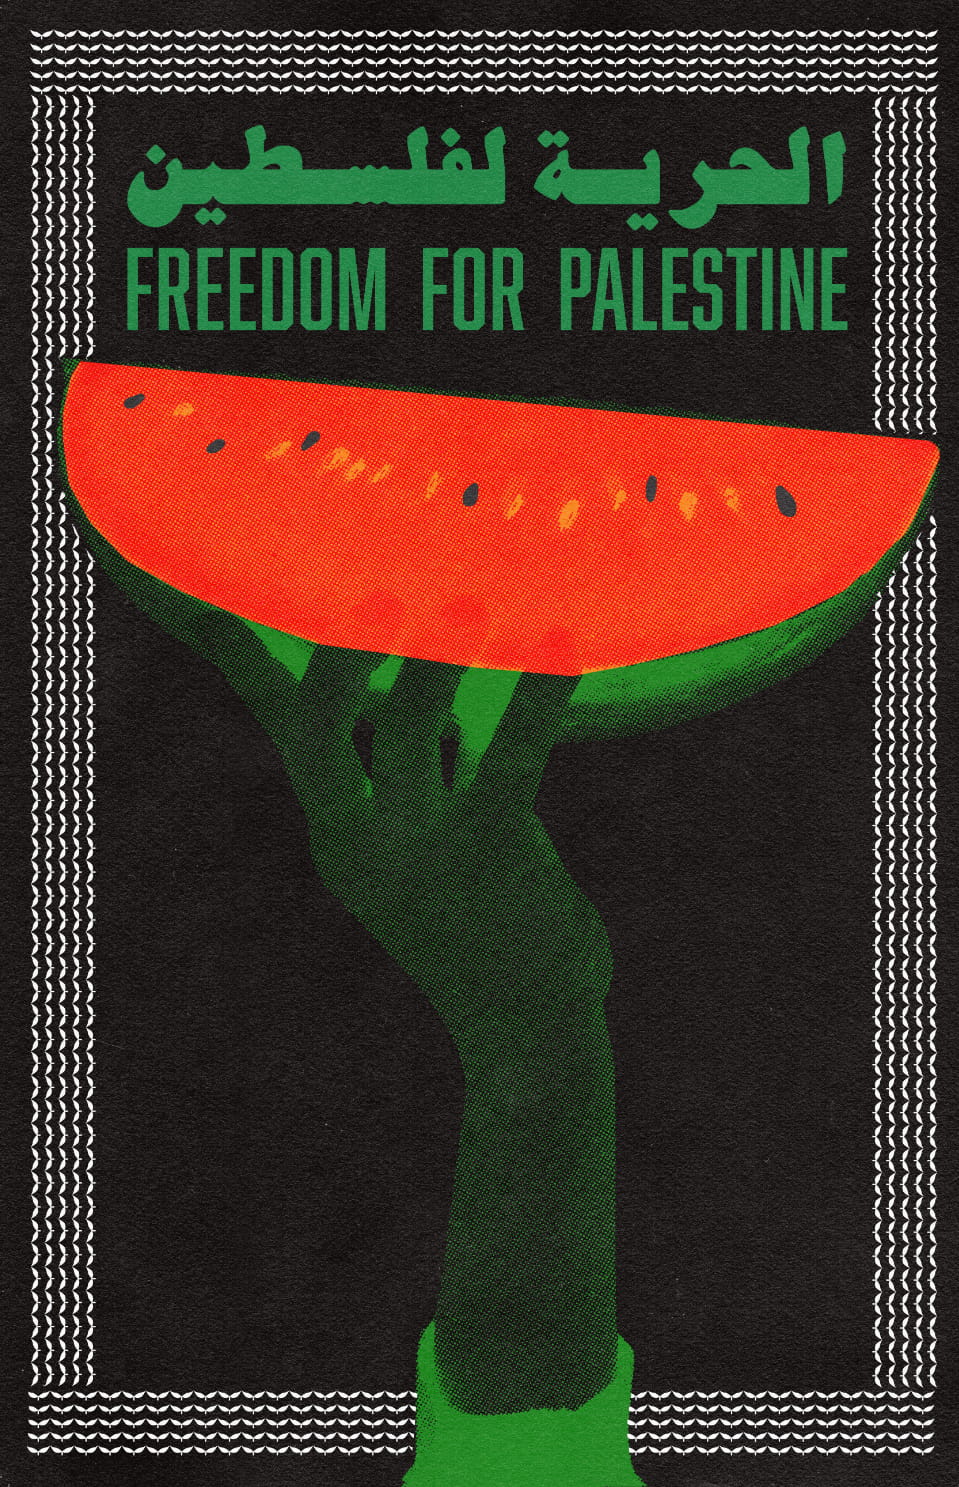 A risograph print of a hand holding up a watermelon that says 'Freedom for Palestine' in both English and Arabic.